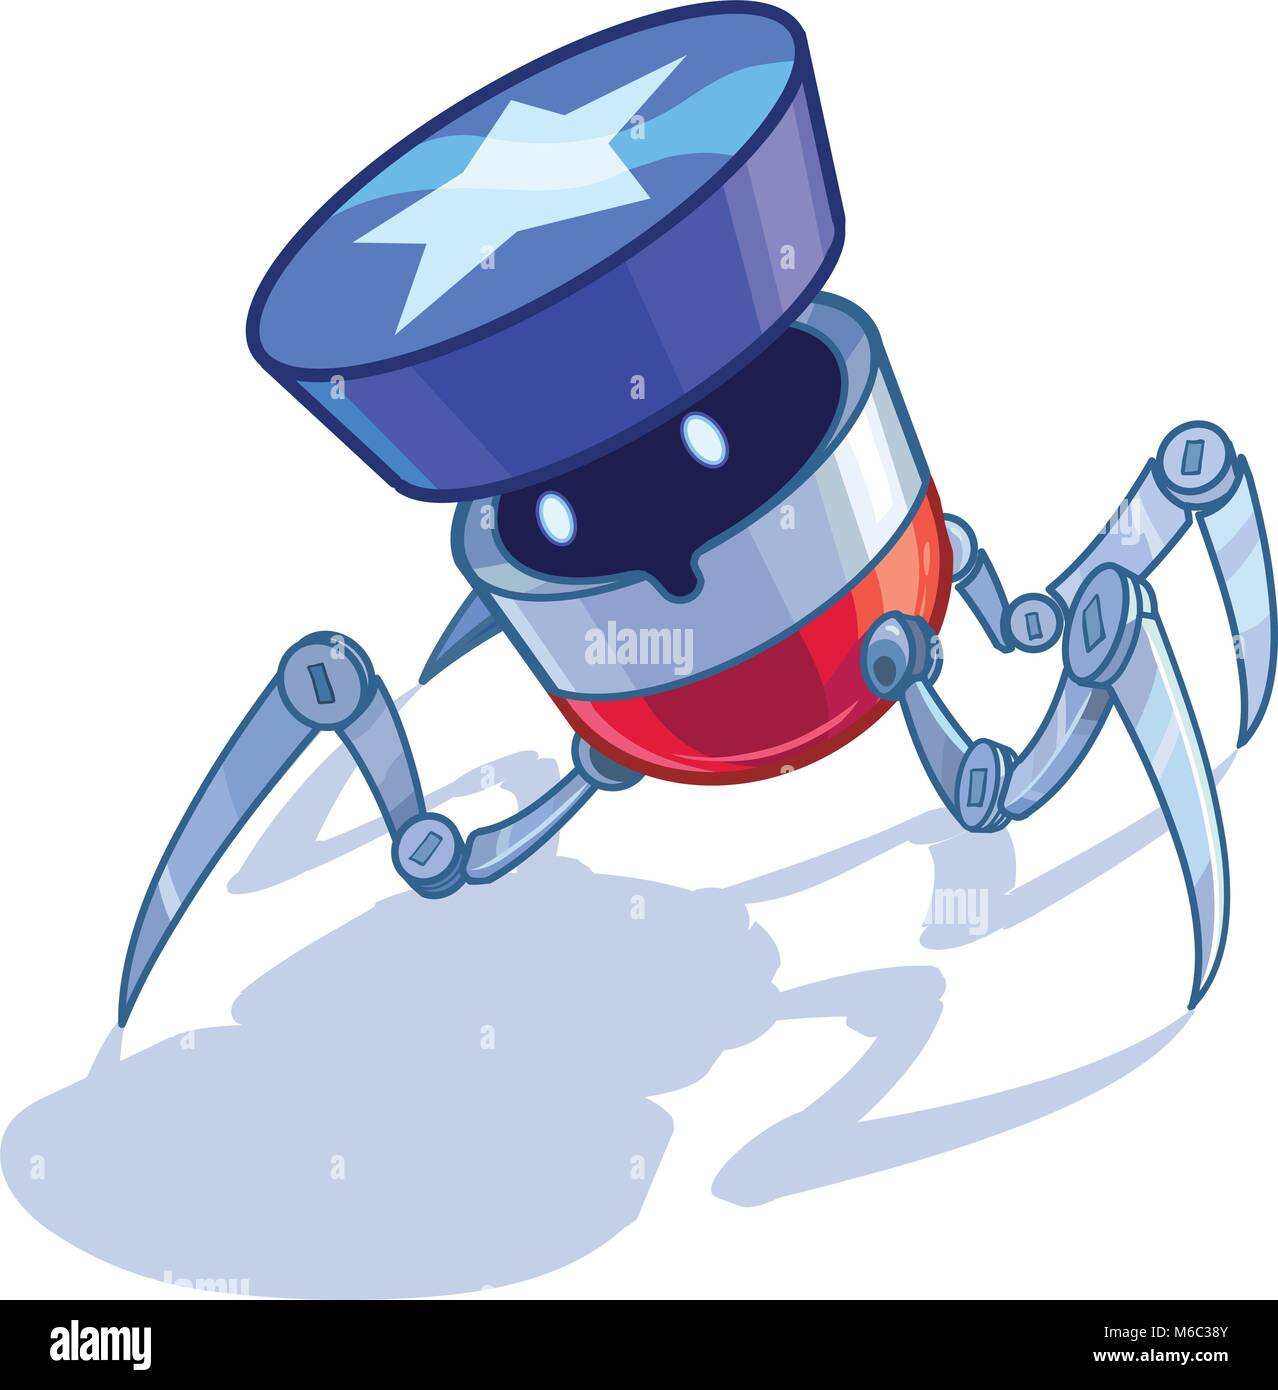 Vector cartoon clip art illustration of a patriotic American spider or bug or insect robot with a star shape button or bumper on its head. Elements on Stock Vector